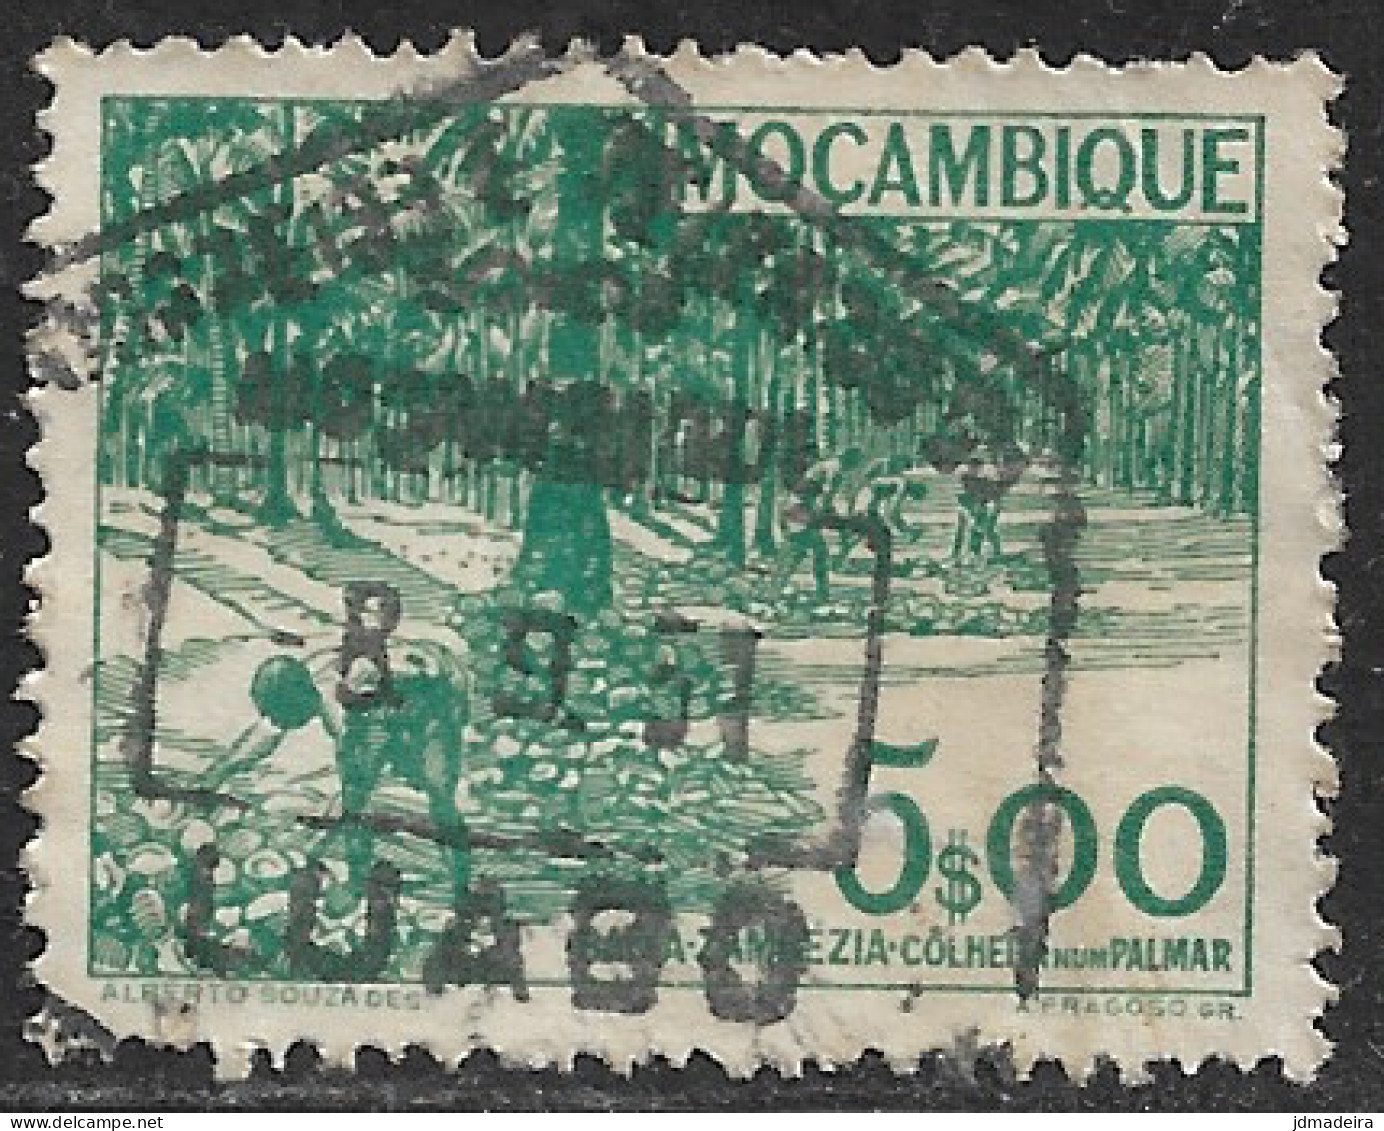 Mocambique – 1948 Views 5$00 Used Stamp Beautiful LUABO Cancel - Mozambique